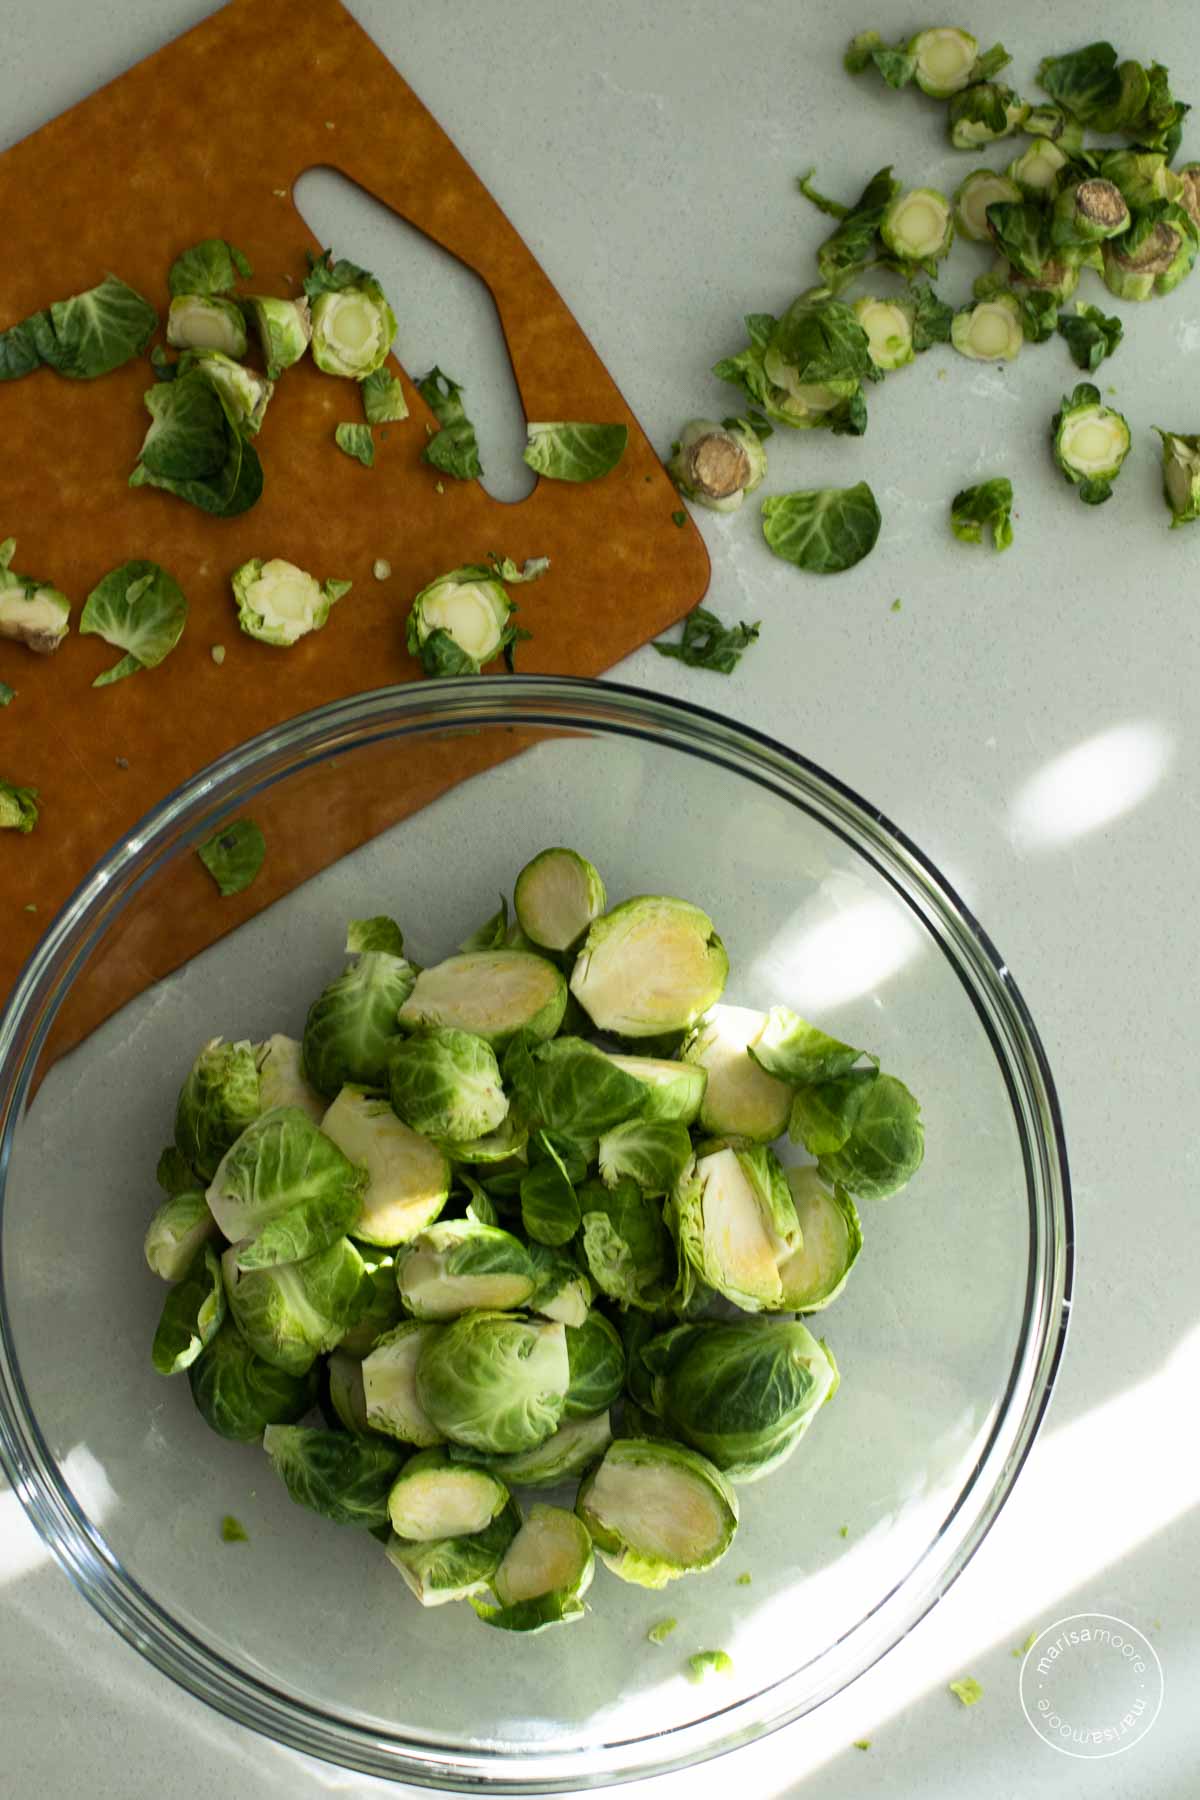 Cutting board and glass bowl with brussels sprouts being sliced